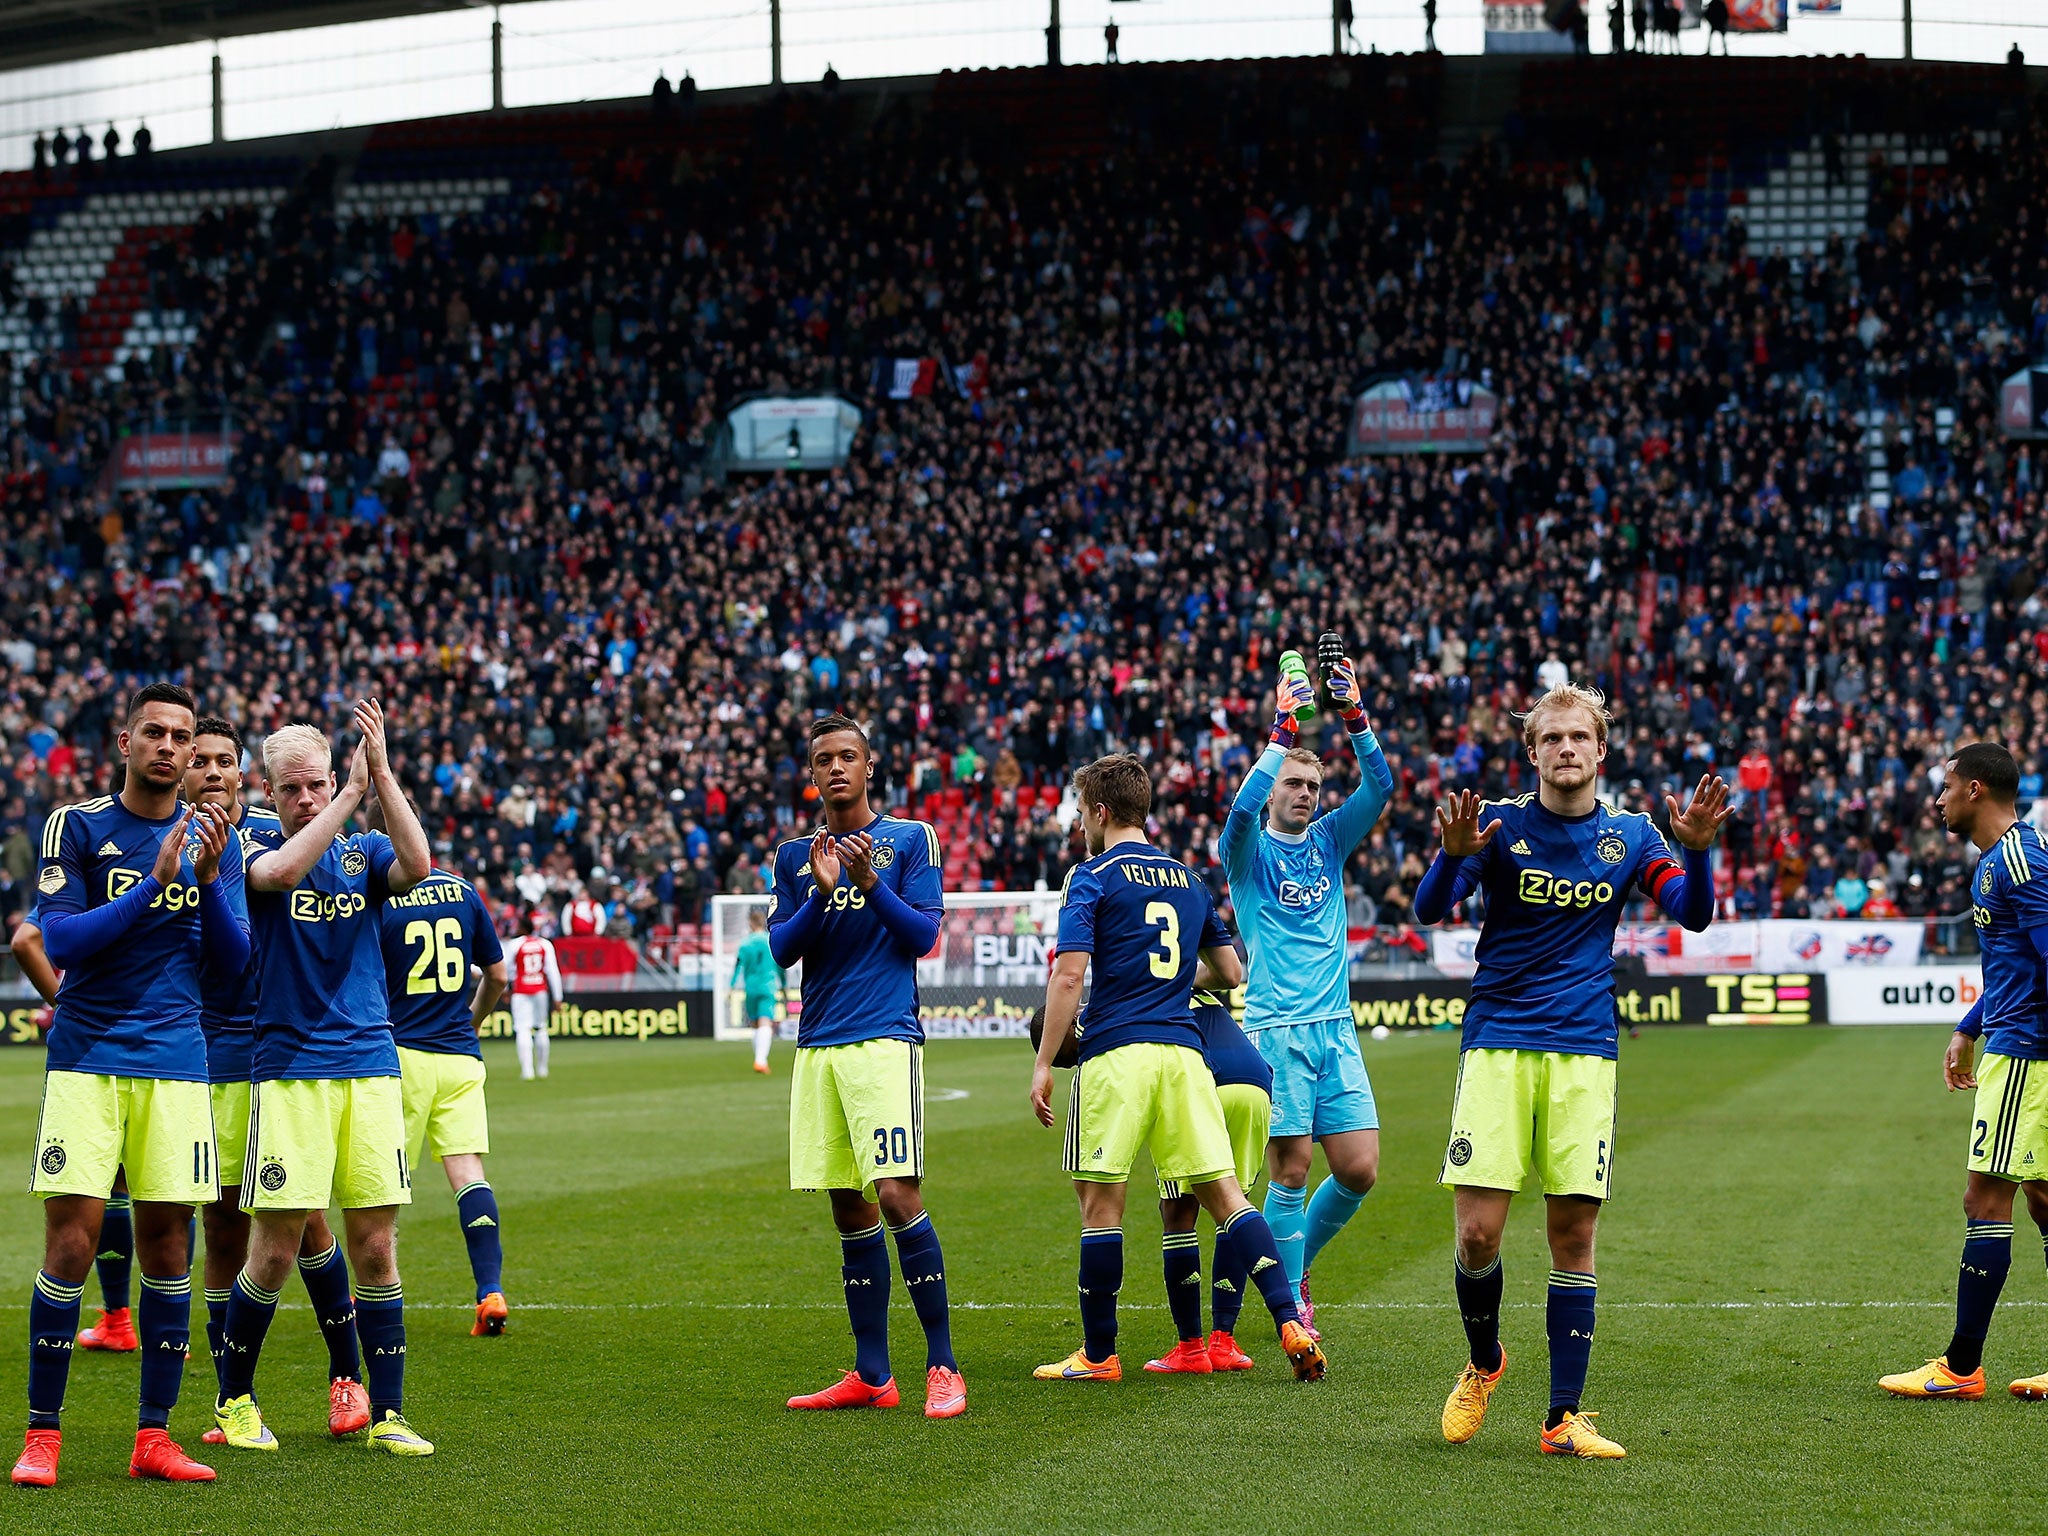 Ajax players applaud their fans after the Dutch Eredivisie match against FC Utrecht on Sunday which was marred by anti-Semitic chanting